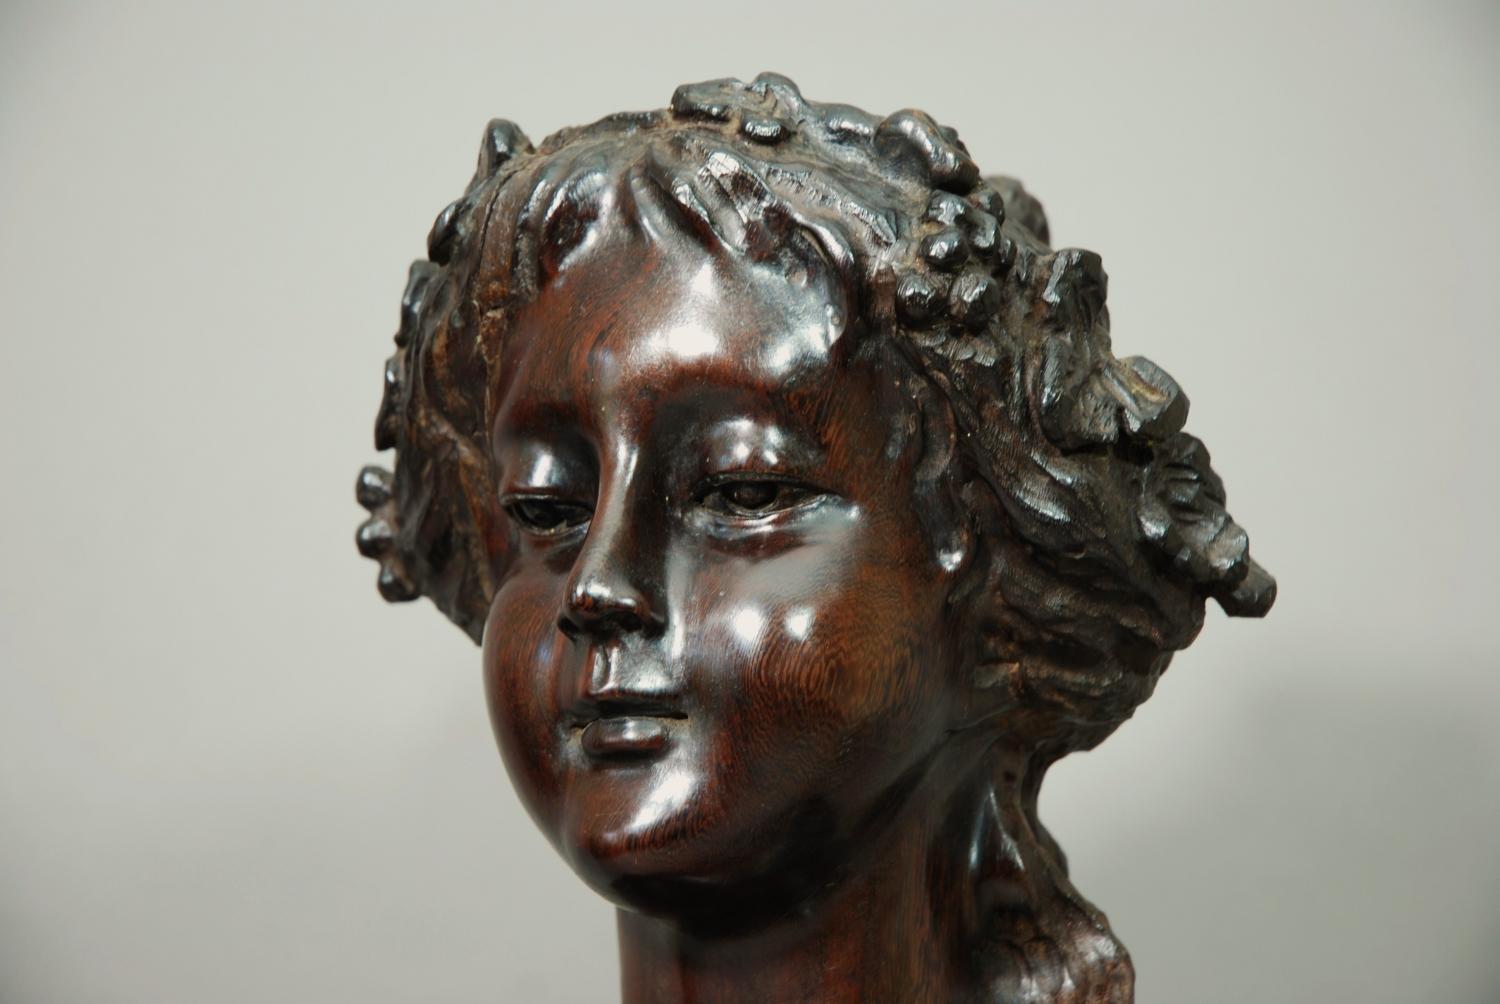 Carved wooden figure of a young bacchante